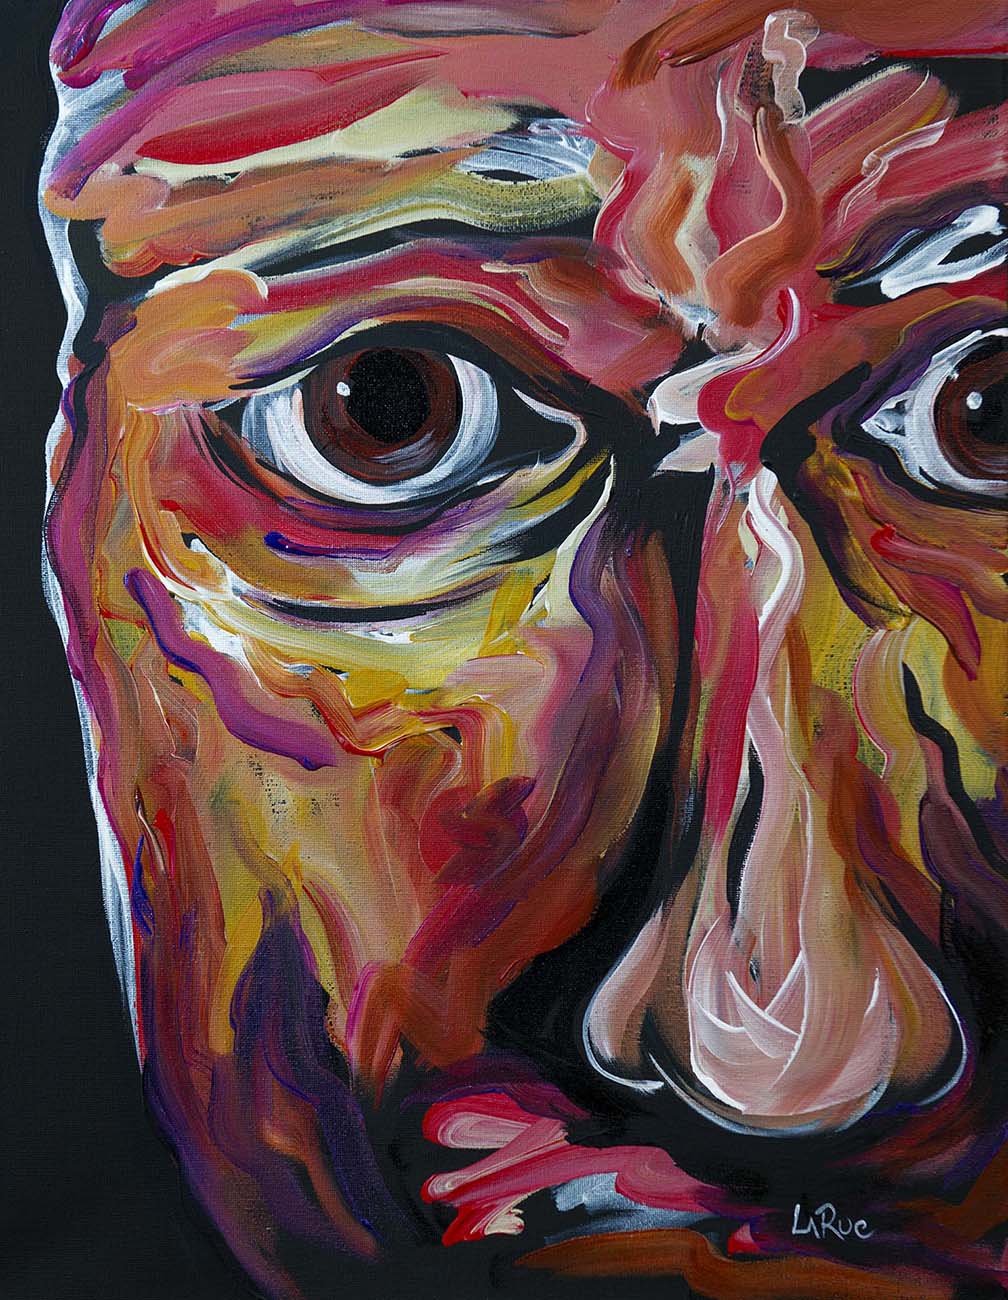 Lawrence, figurative abstract portrait painting by Doug LaRue